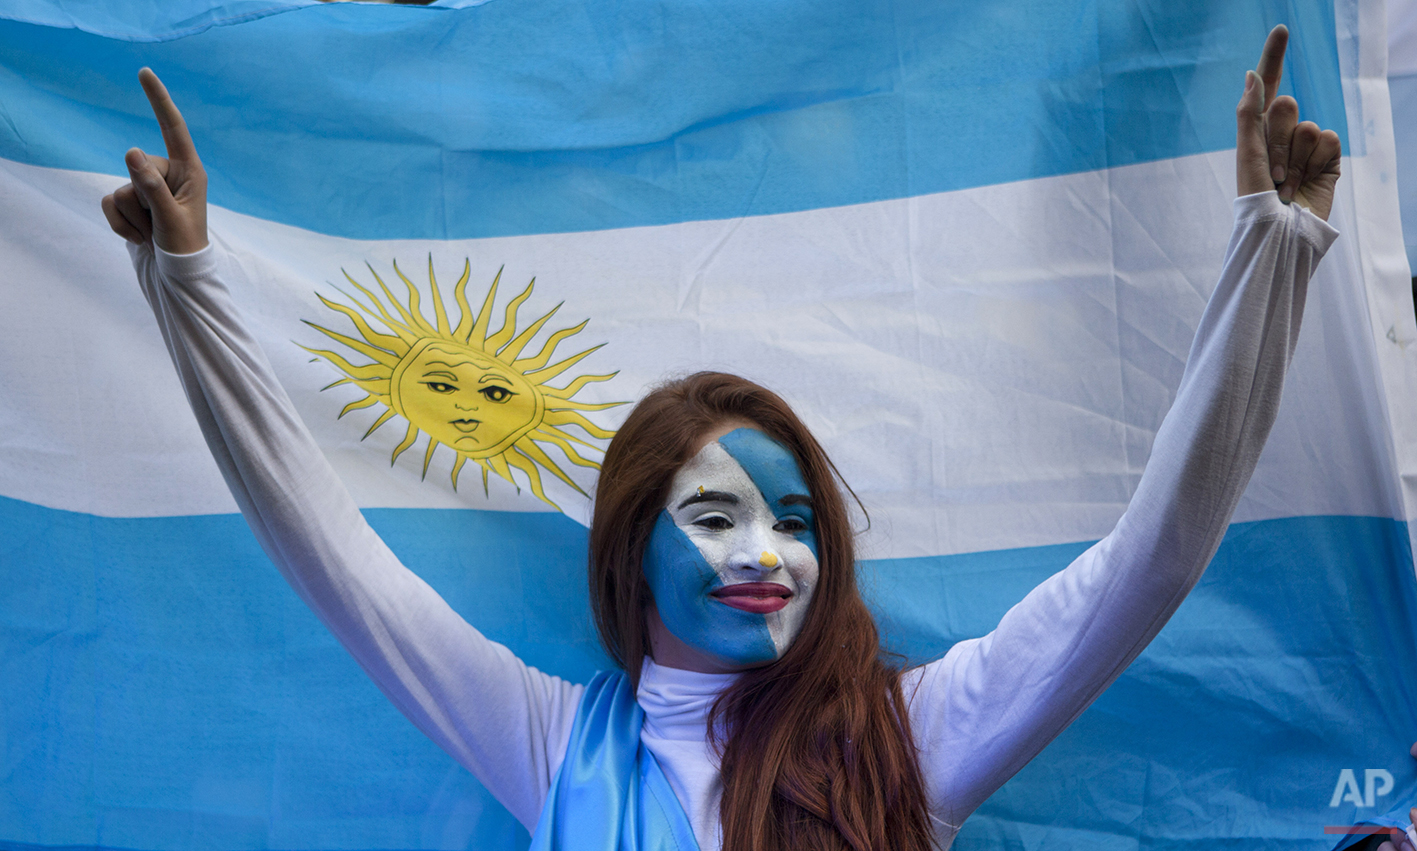  An Argentina soccer fan poses in front of an Argentine flag before a World Cup semifinal match between Argentina against Netherlands, on a street where an outdoor screen has been set for viewing, in Buenos Aires, Argentina, Wednesday, July 9, 2014. 